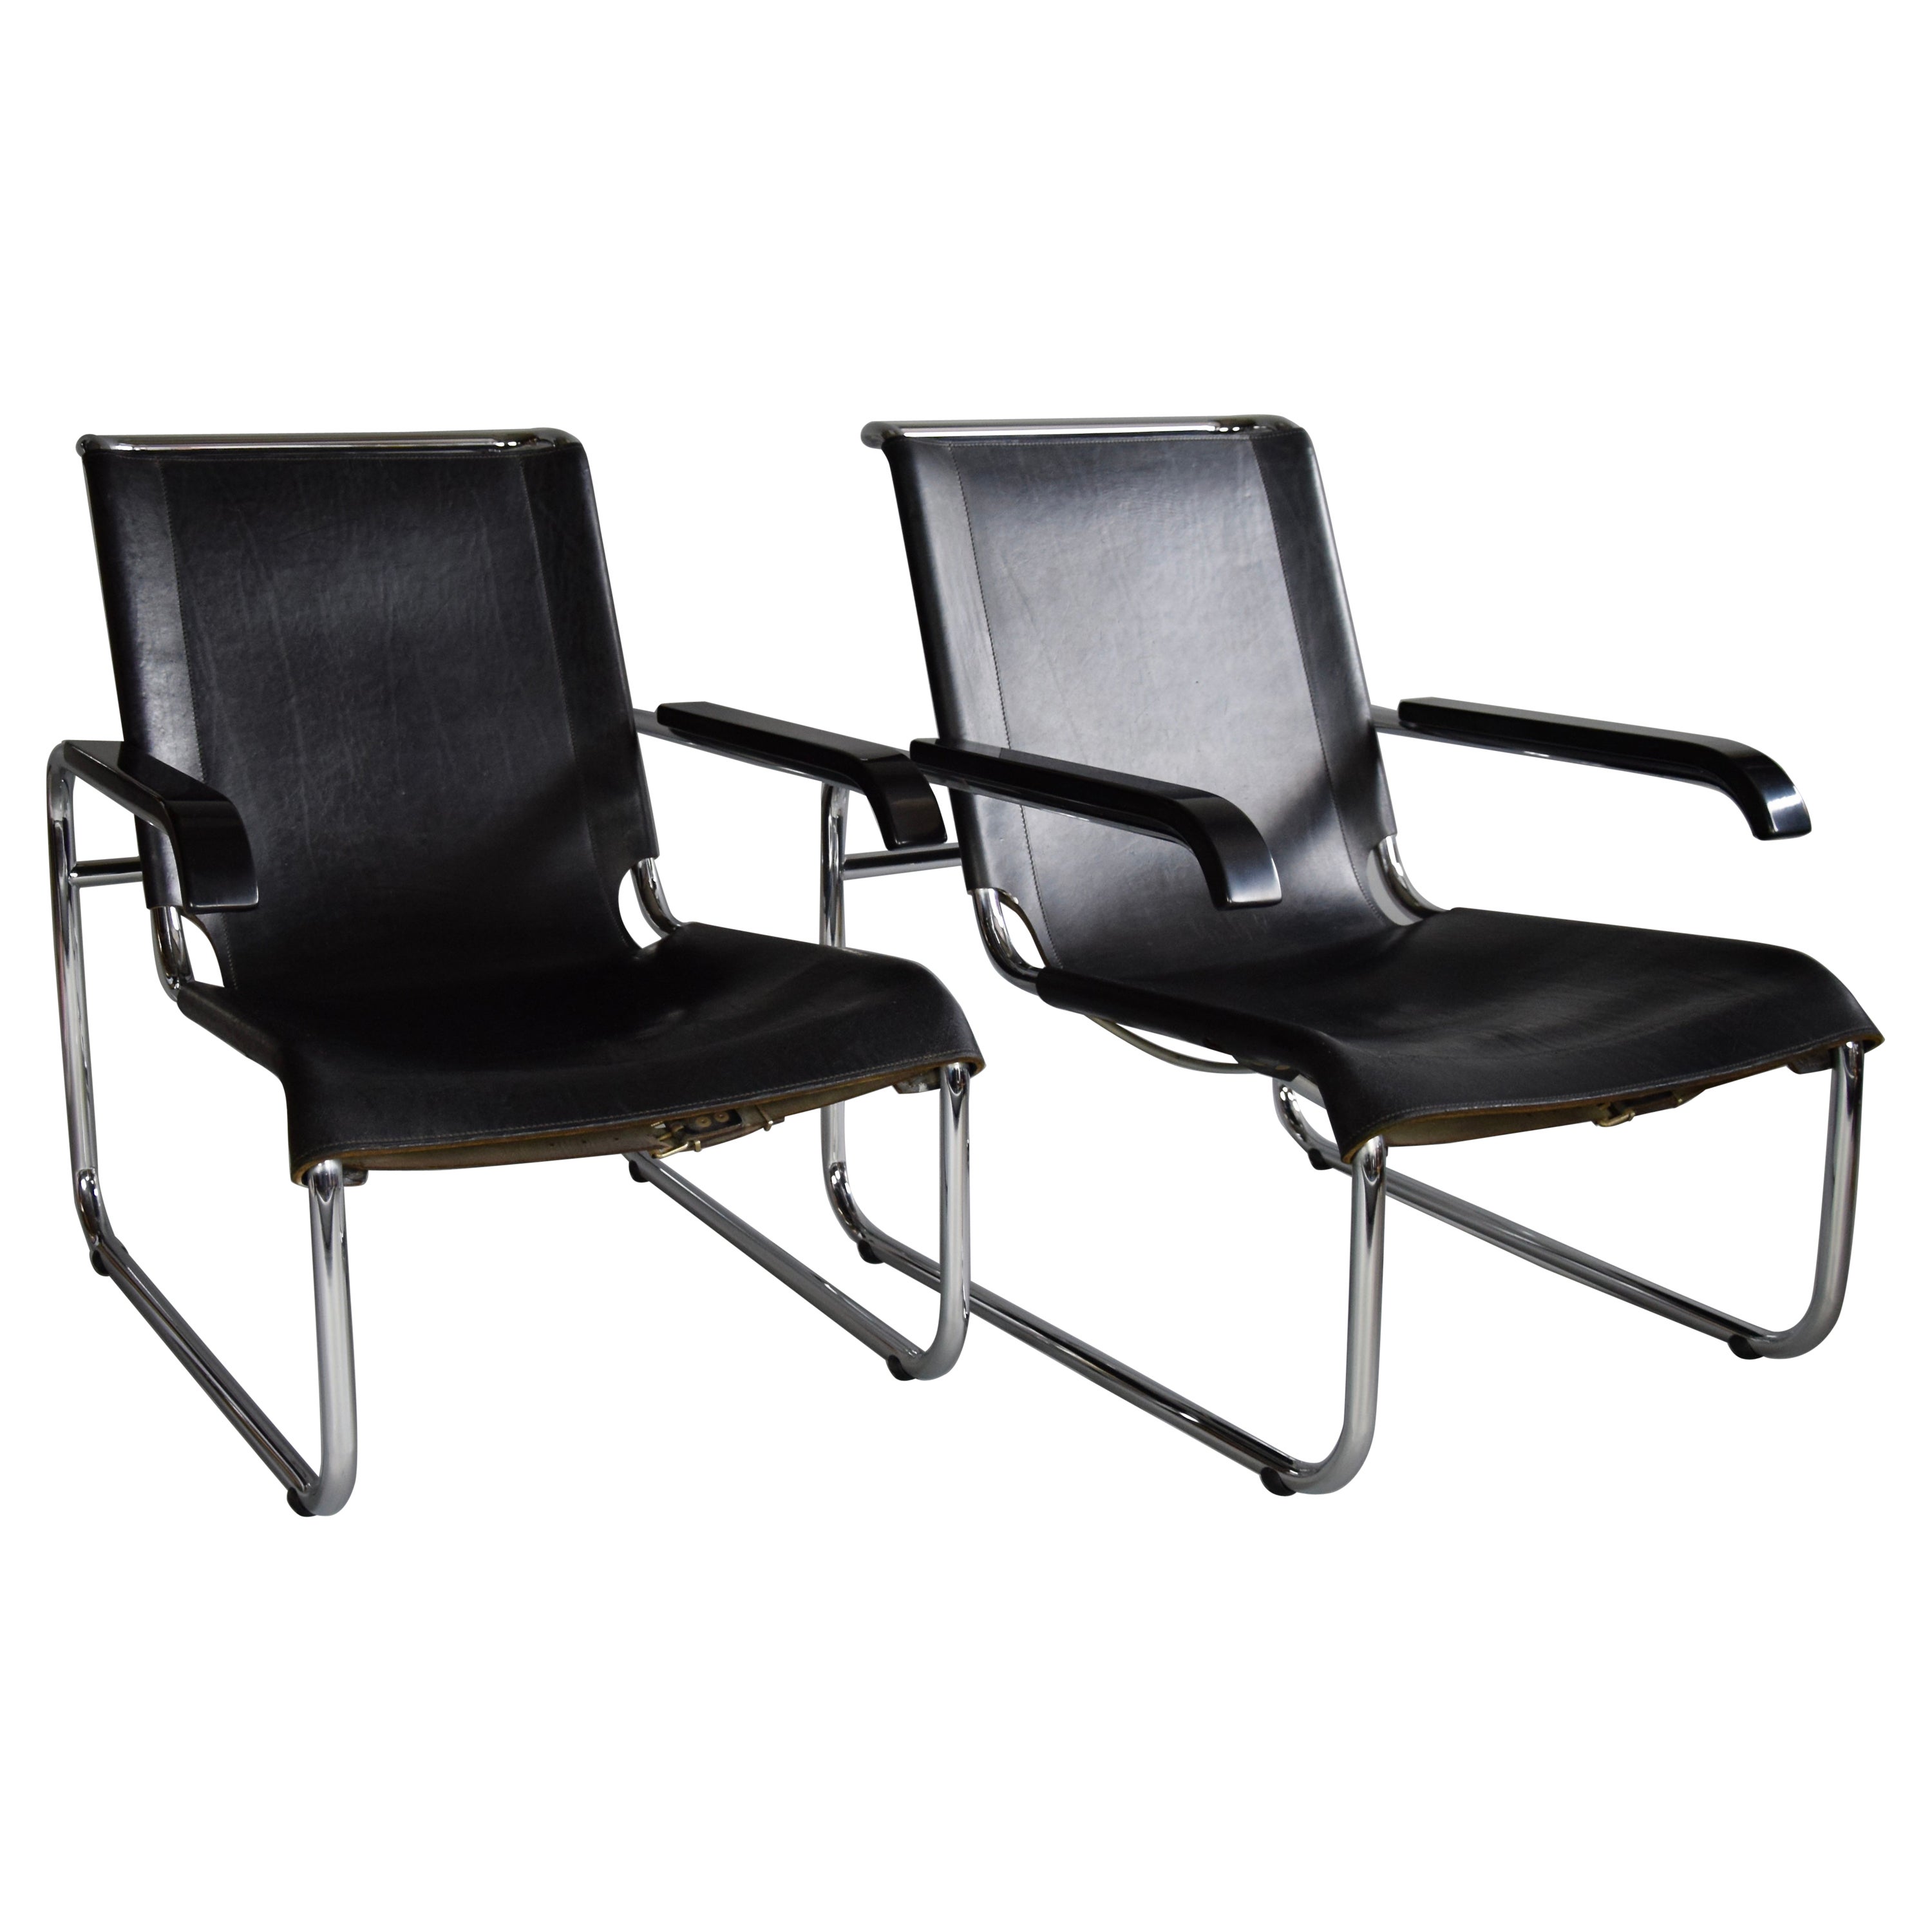 Marcel Breuer B35 Black and Chrome Lounge Chairs